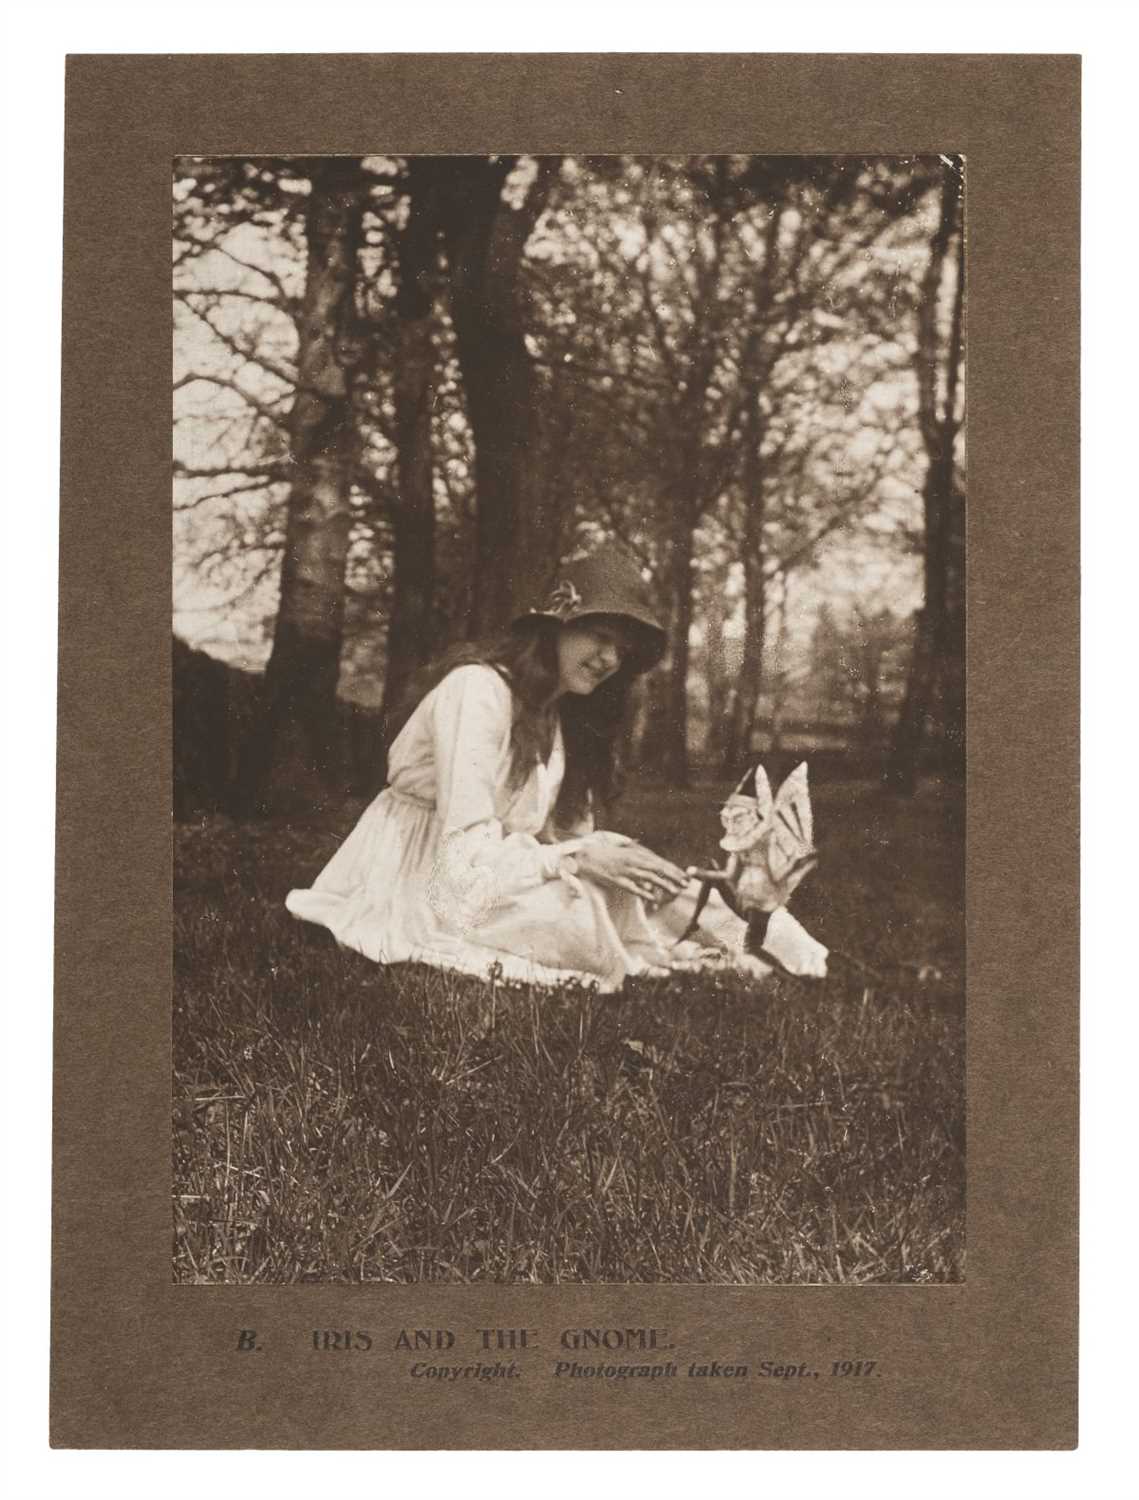 Lot 237 - Cottingley Fairies. Iris and the Gnome, photograph of Elsie Wright, 1917